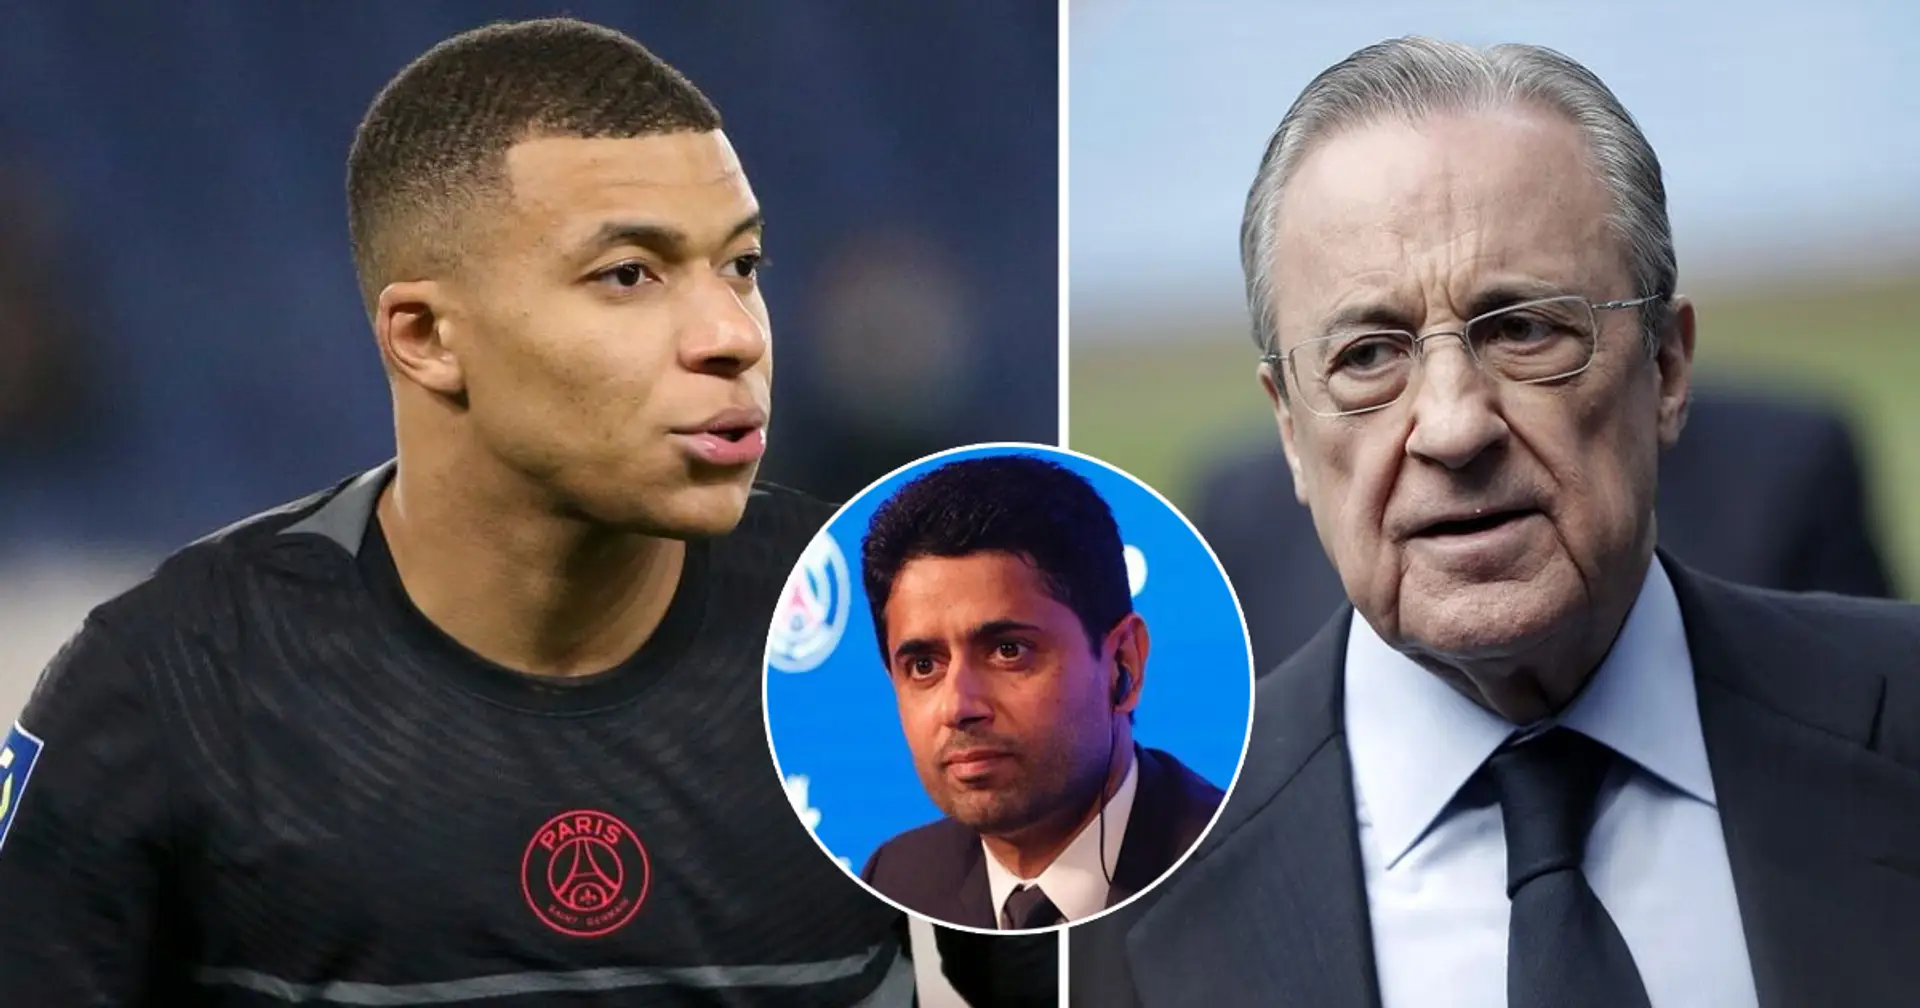 Mbappe told he'll never play for Madrid if he accepts short-term PSG extension (reliability: 4 stars)